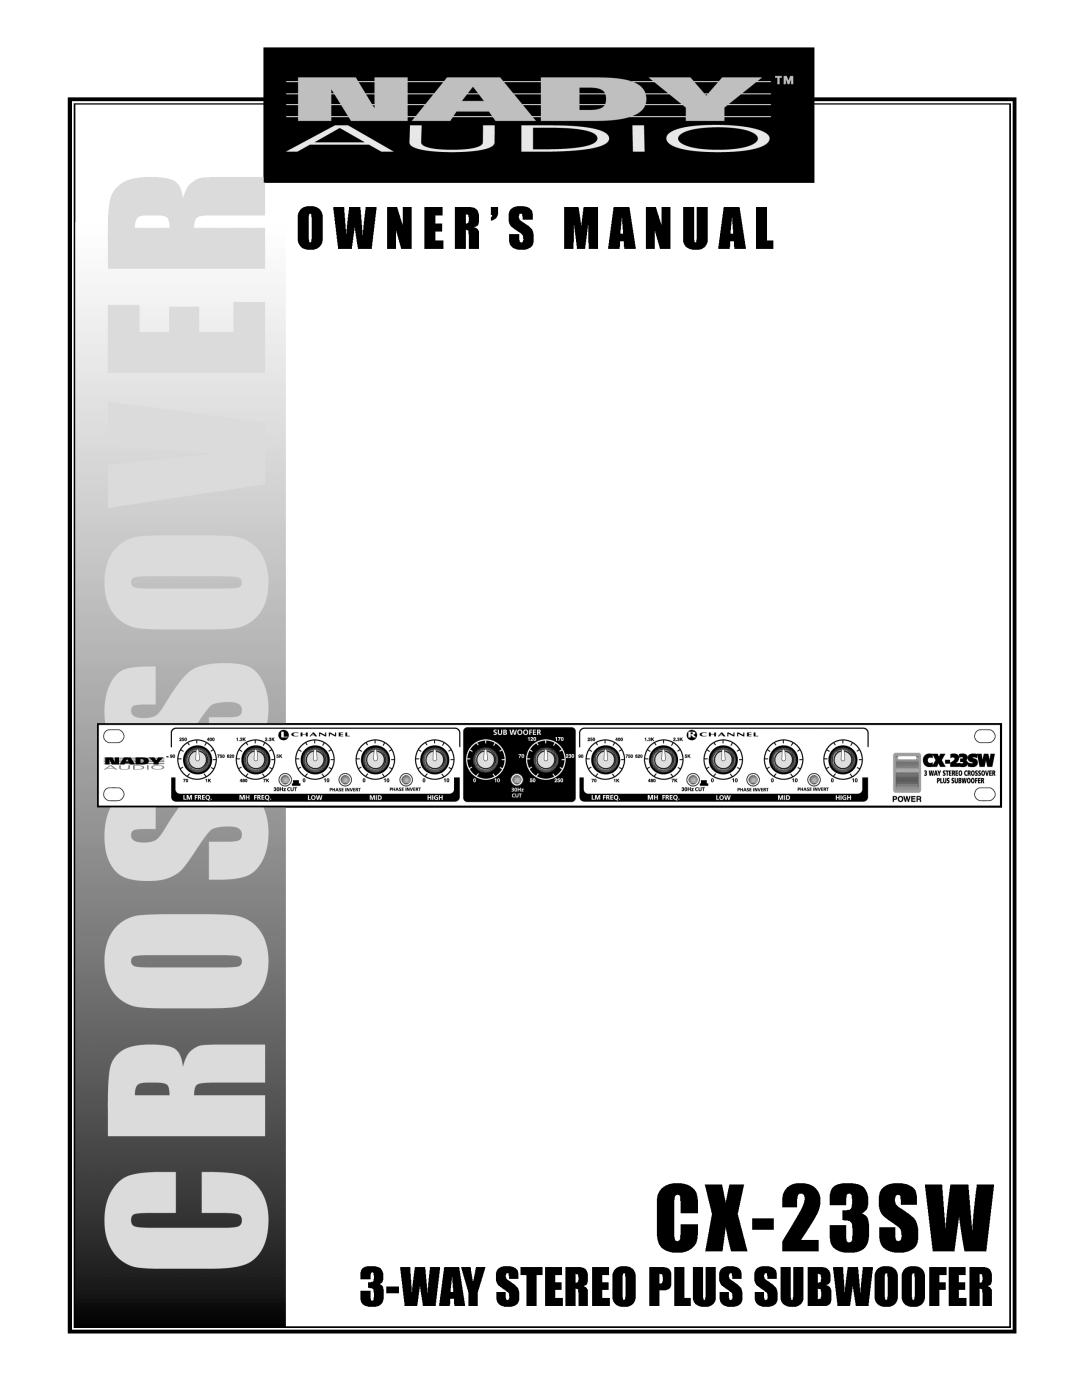 Nady Systems CX-23SW owner manual Crossover, Waystereo Plus Subwoofer 